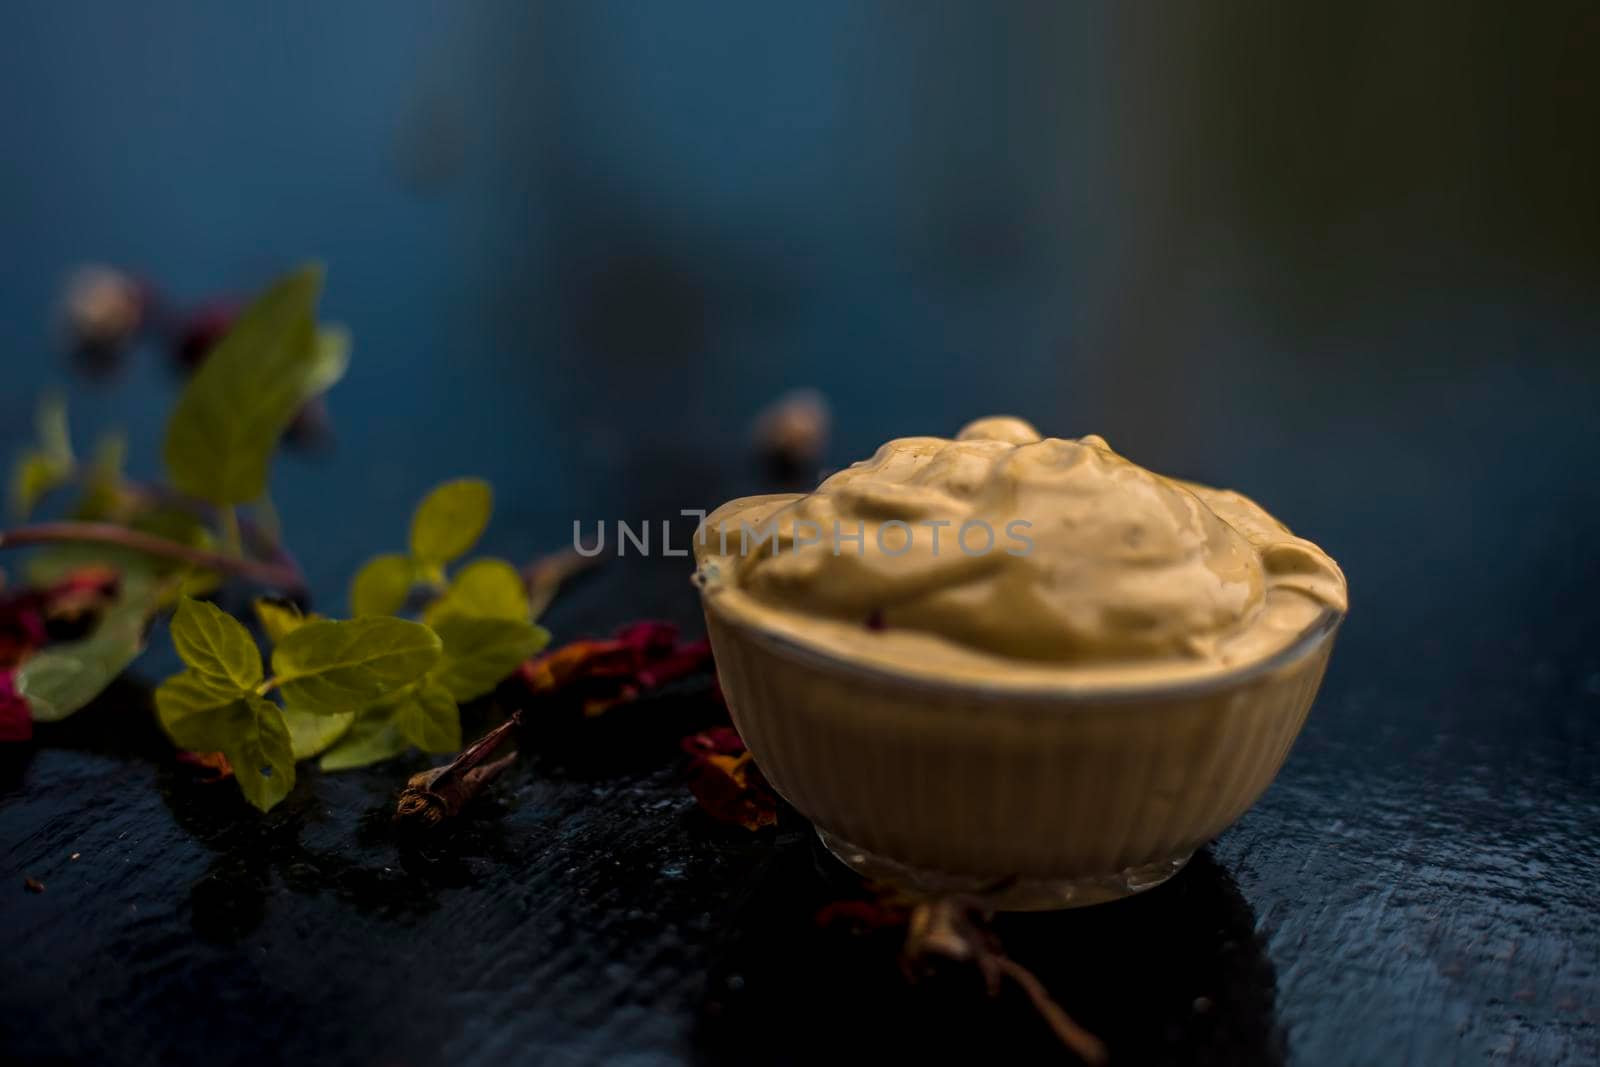 Homemade DIY face mask on the wooden surface consisting of yogurt,multani mitti or mulpani mitti (fuller's earth) and mint leaves in a glass bowl. For the treatment removal of dark patches.